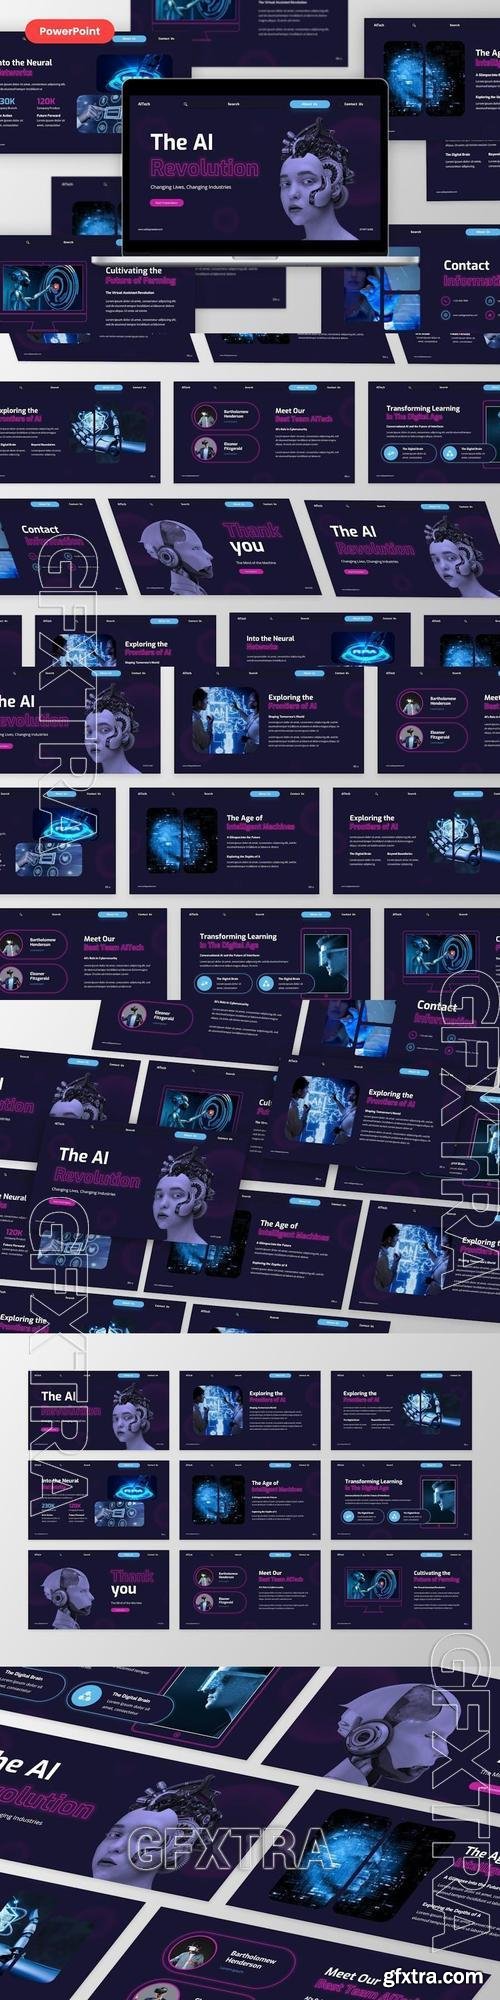 AI Revolution - AI Technology PowerPoint, Keynote and Google Slides Template